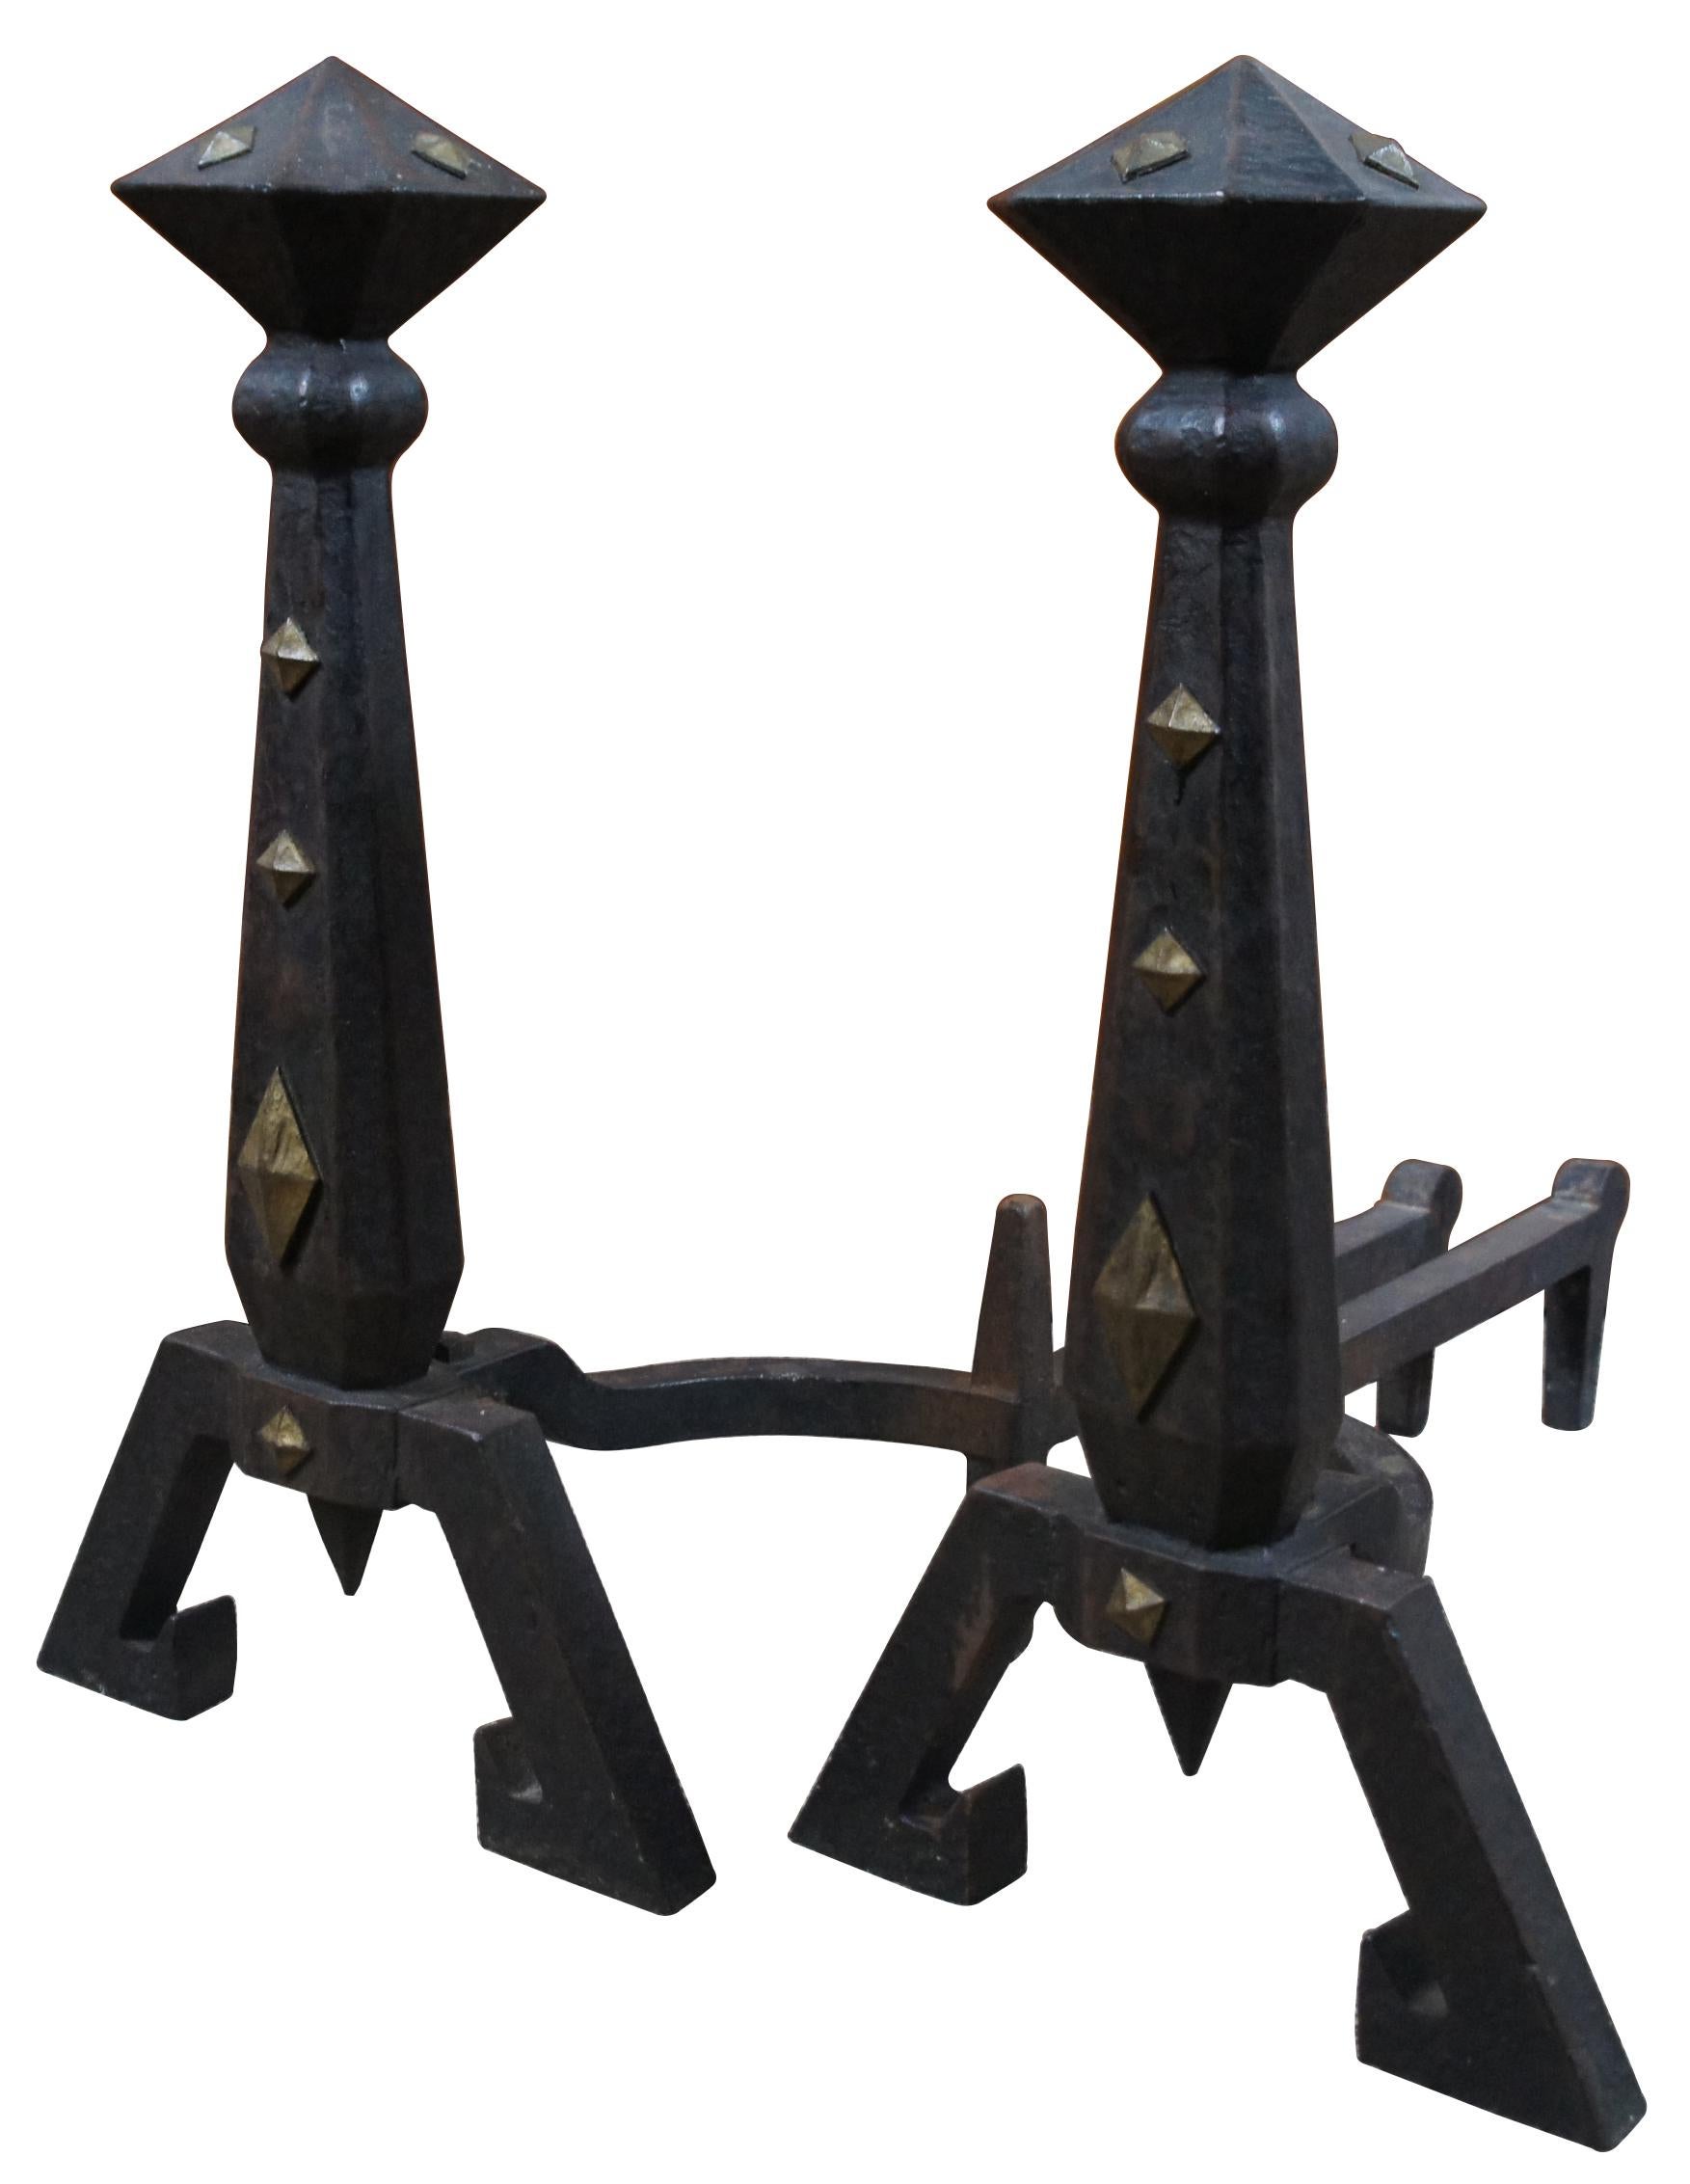 Pair of Arts & Crafts cast iron andirons with brass accents by Bradley & Hubbard Manufacturing Company, circa 1900s. Model 3995.
 